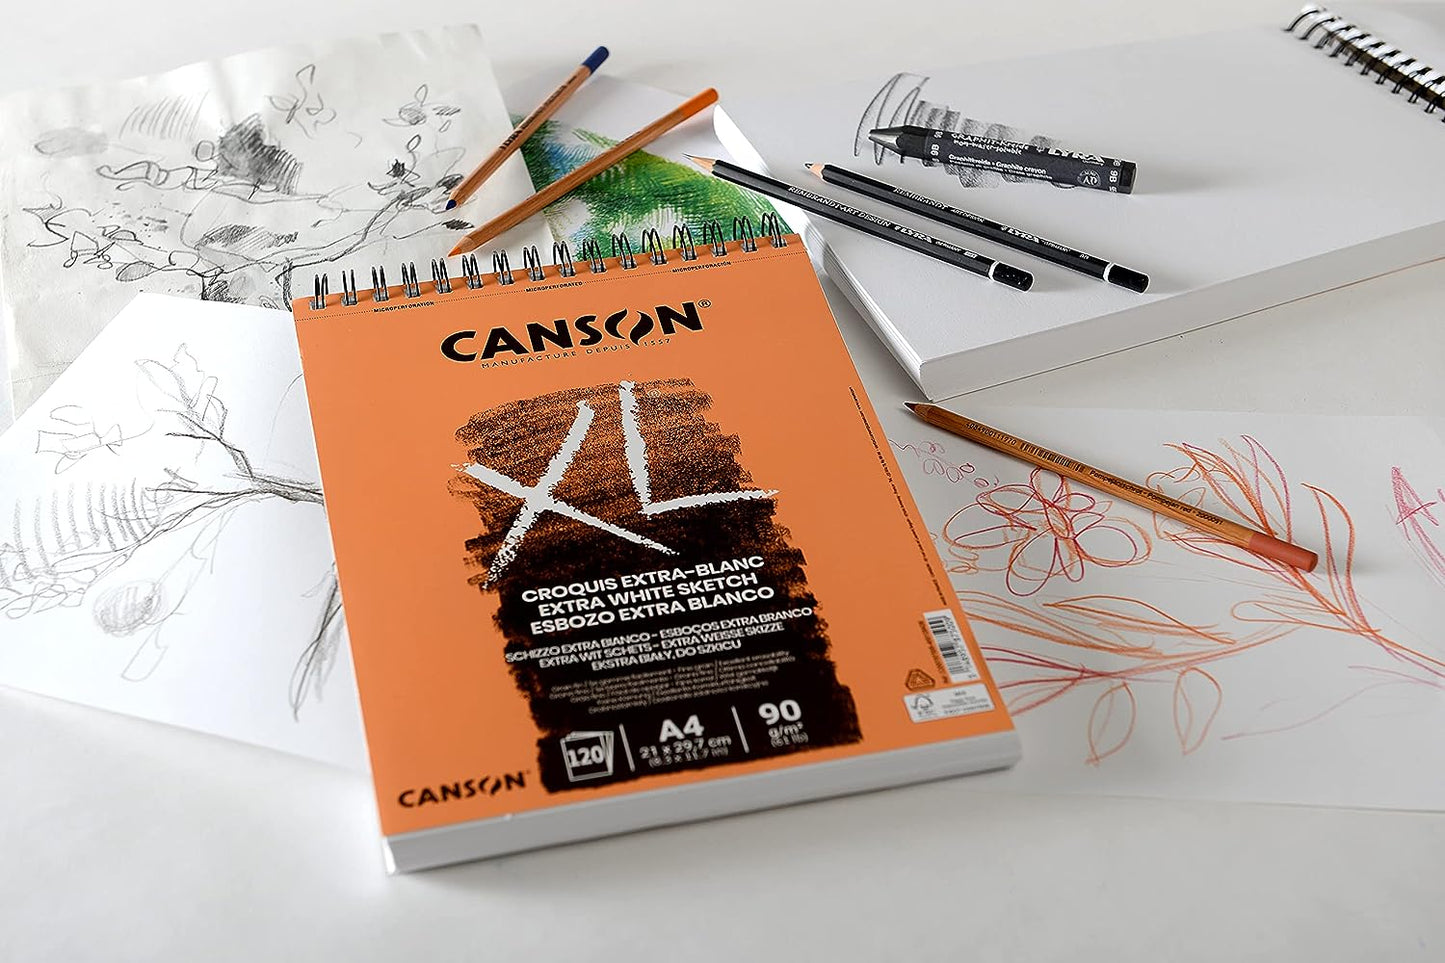 Canson XL Extra-Blanc 90 GSM Fine Grain A4 Paper Spiral Pad(Pure White, 120 Sheets)